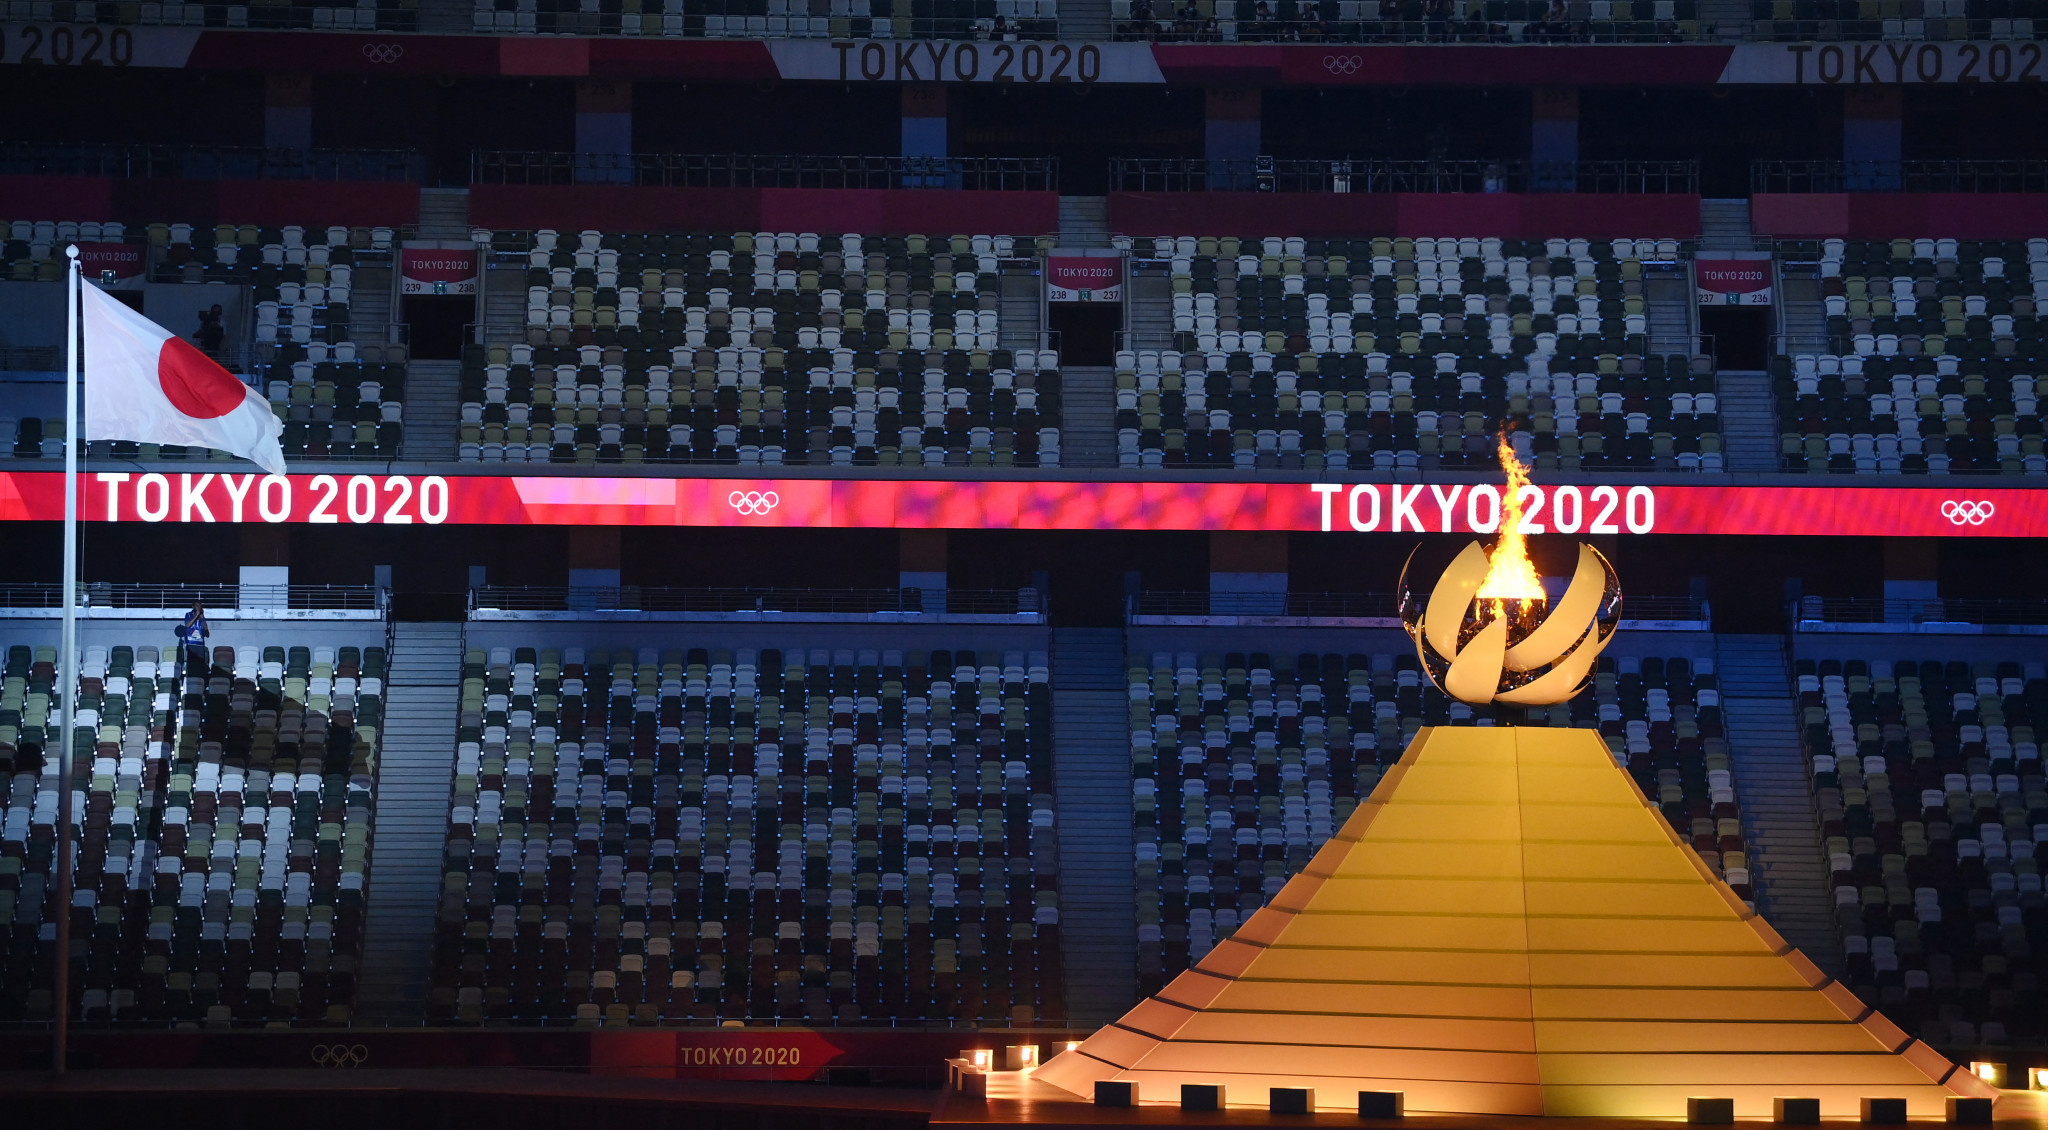 A bribery scandal is threatening to tarnish the Tokyo 2020 Olympics and Paralympics ©Getty Images